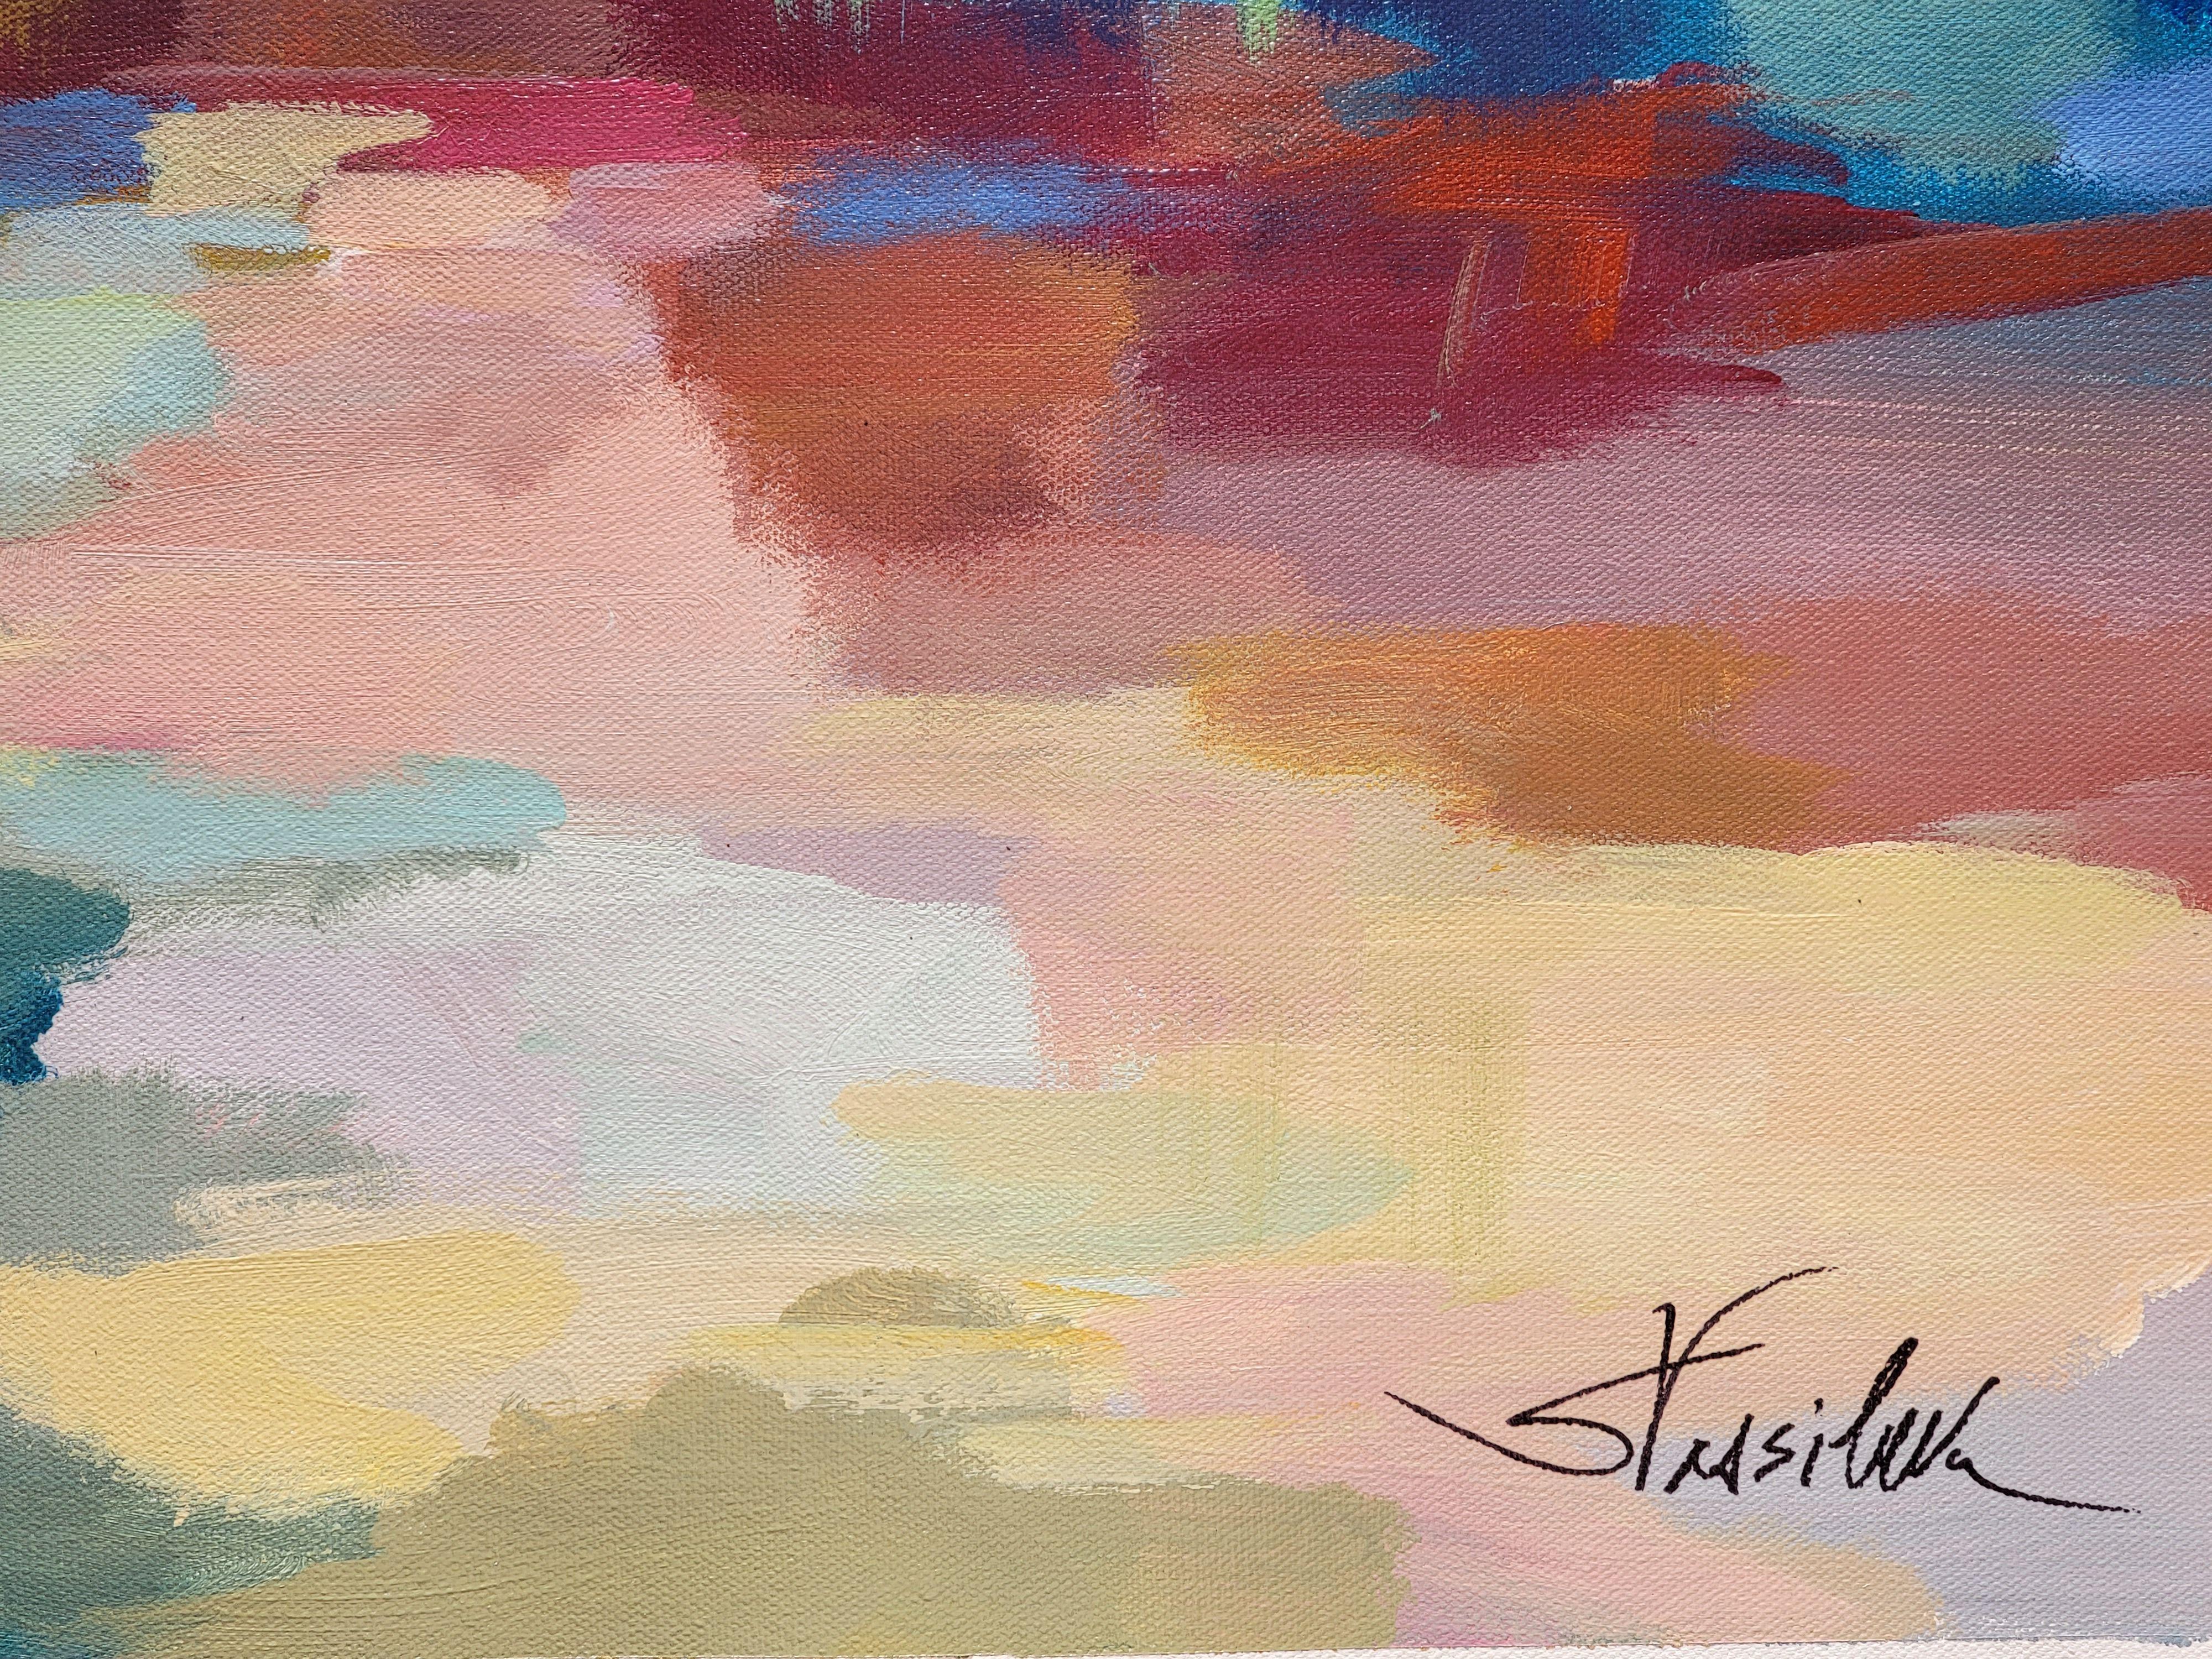 This abstract landscape is inspired by a seaside inlet. Warm yellow, pink and burgundy are juxtaposed to cool mint and aqua. The colors are applied with bold brushstrokes on a textured canvas, creating the ambience of summer celebration. The mood is